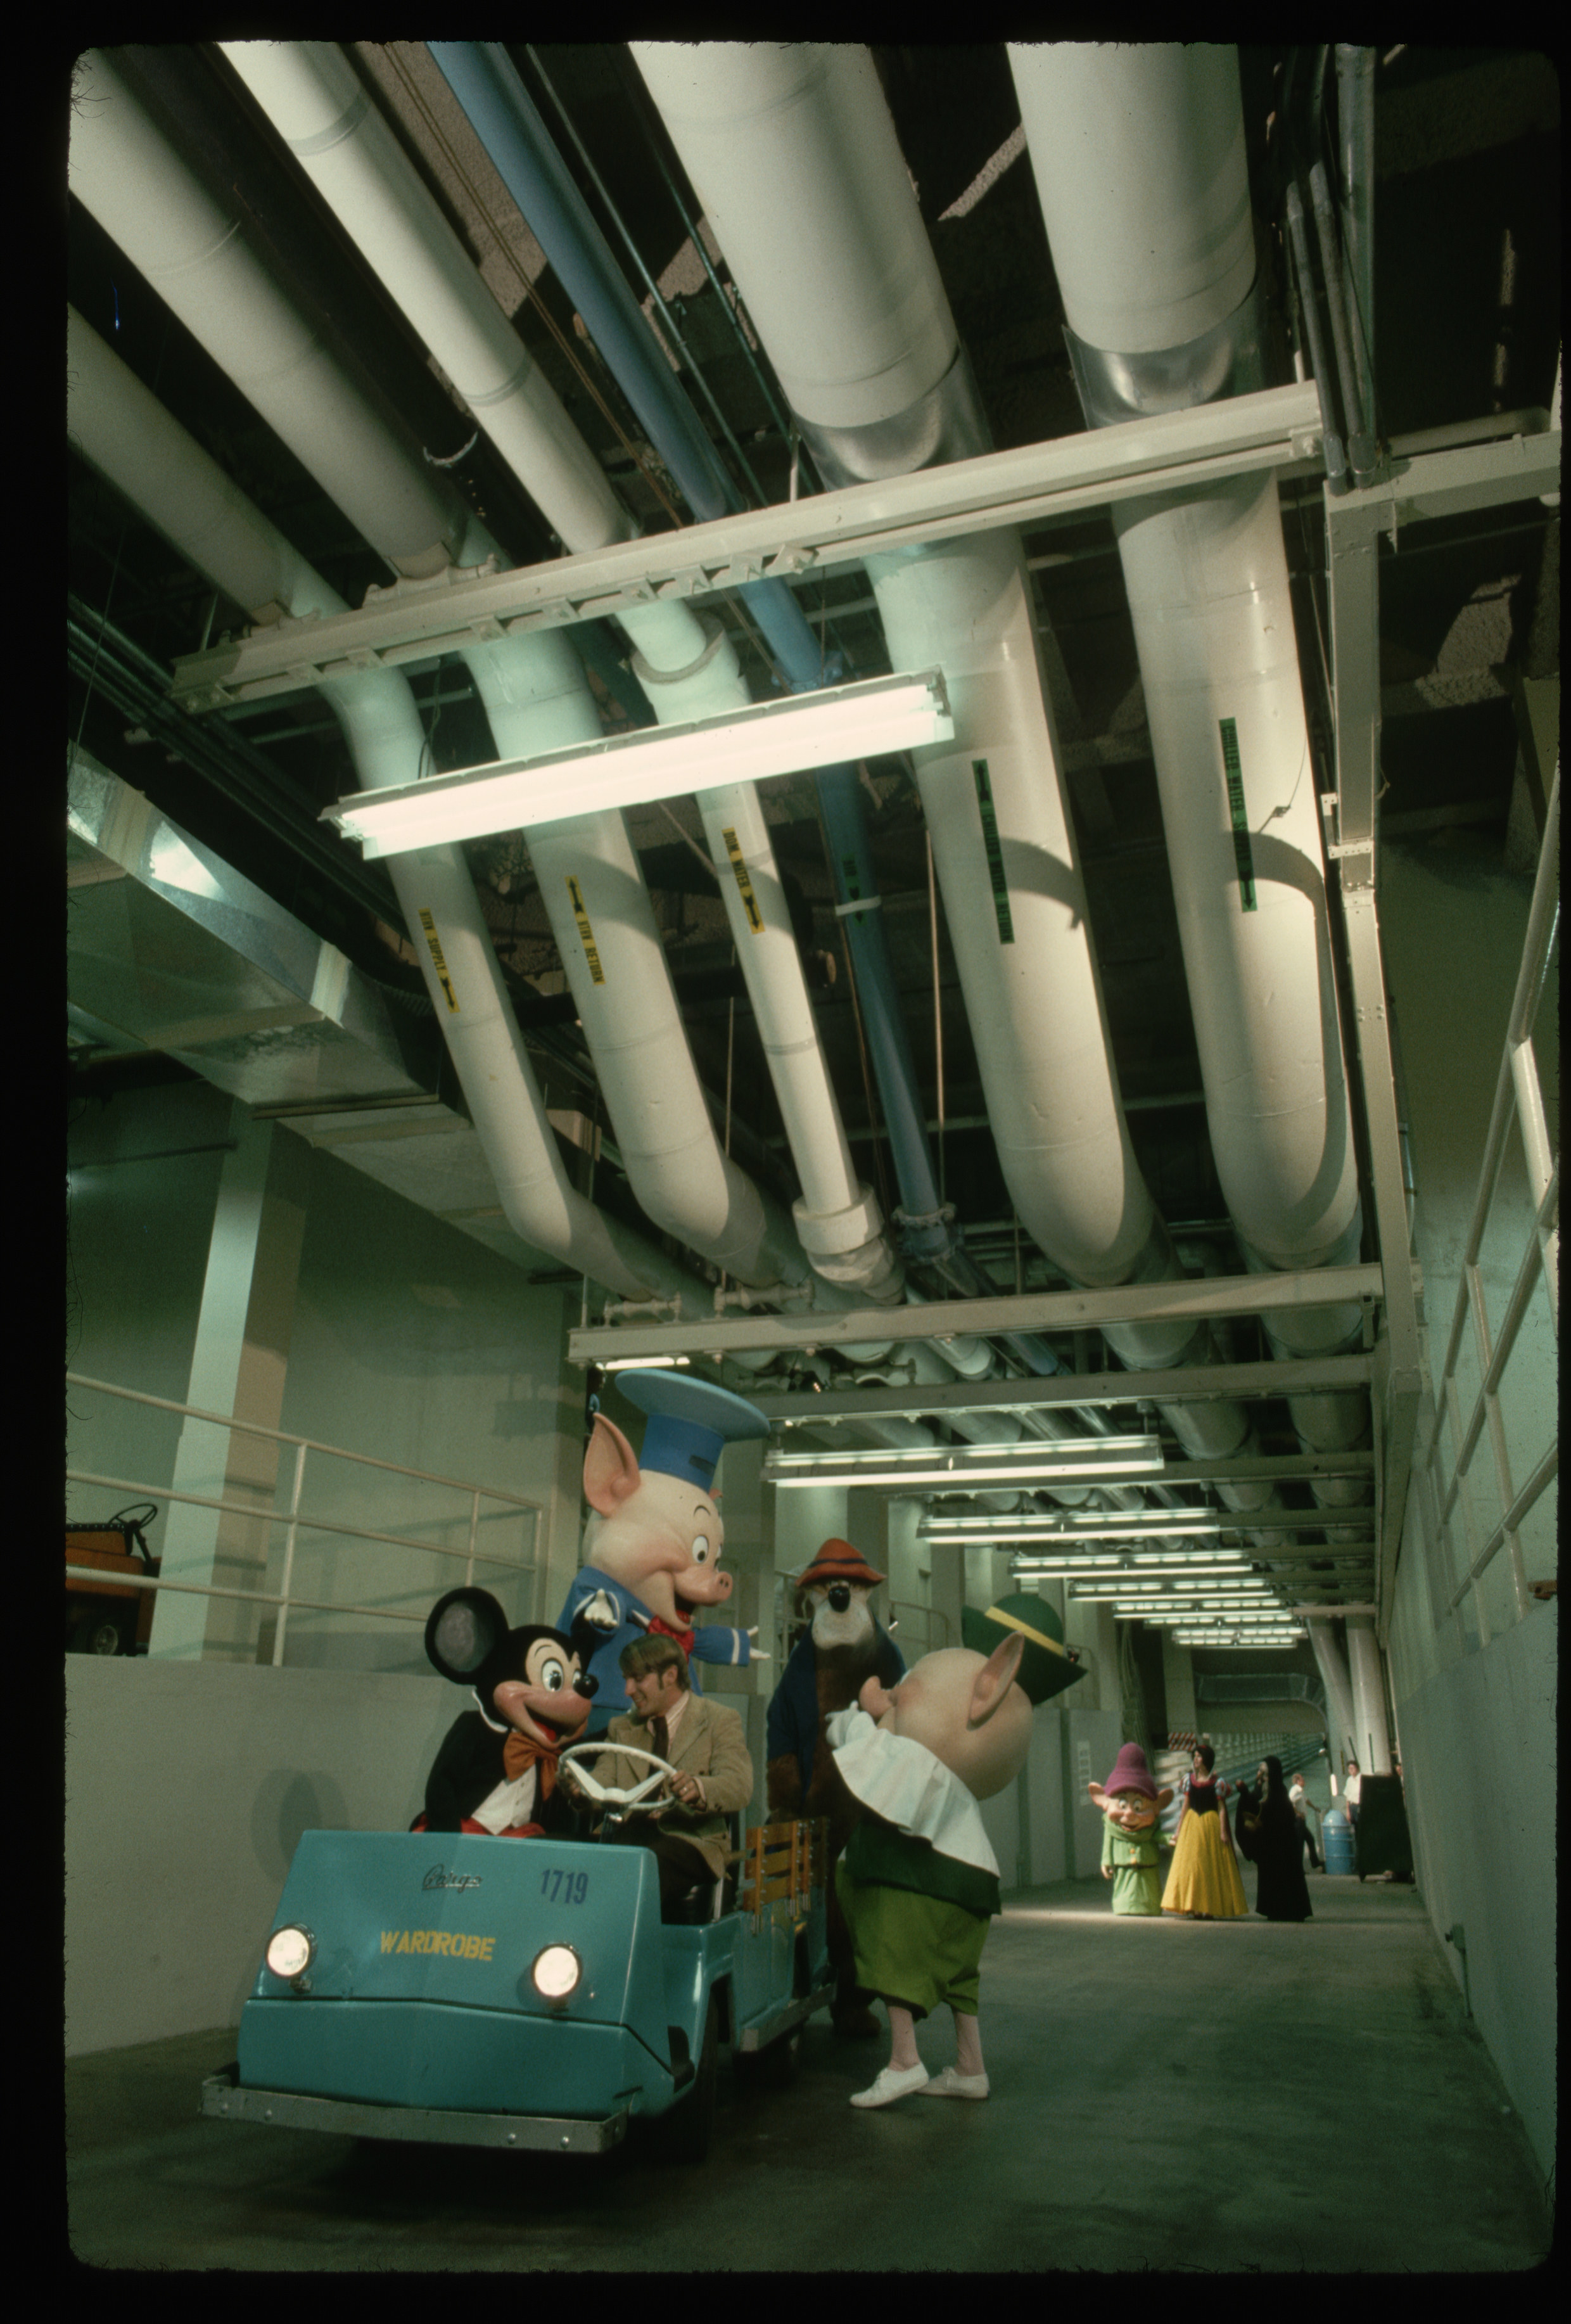 A candid view of Disney characters behind the scenes getting into a shuttle at Disney World